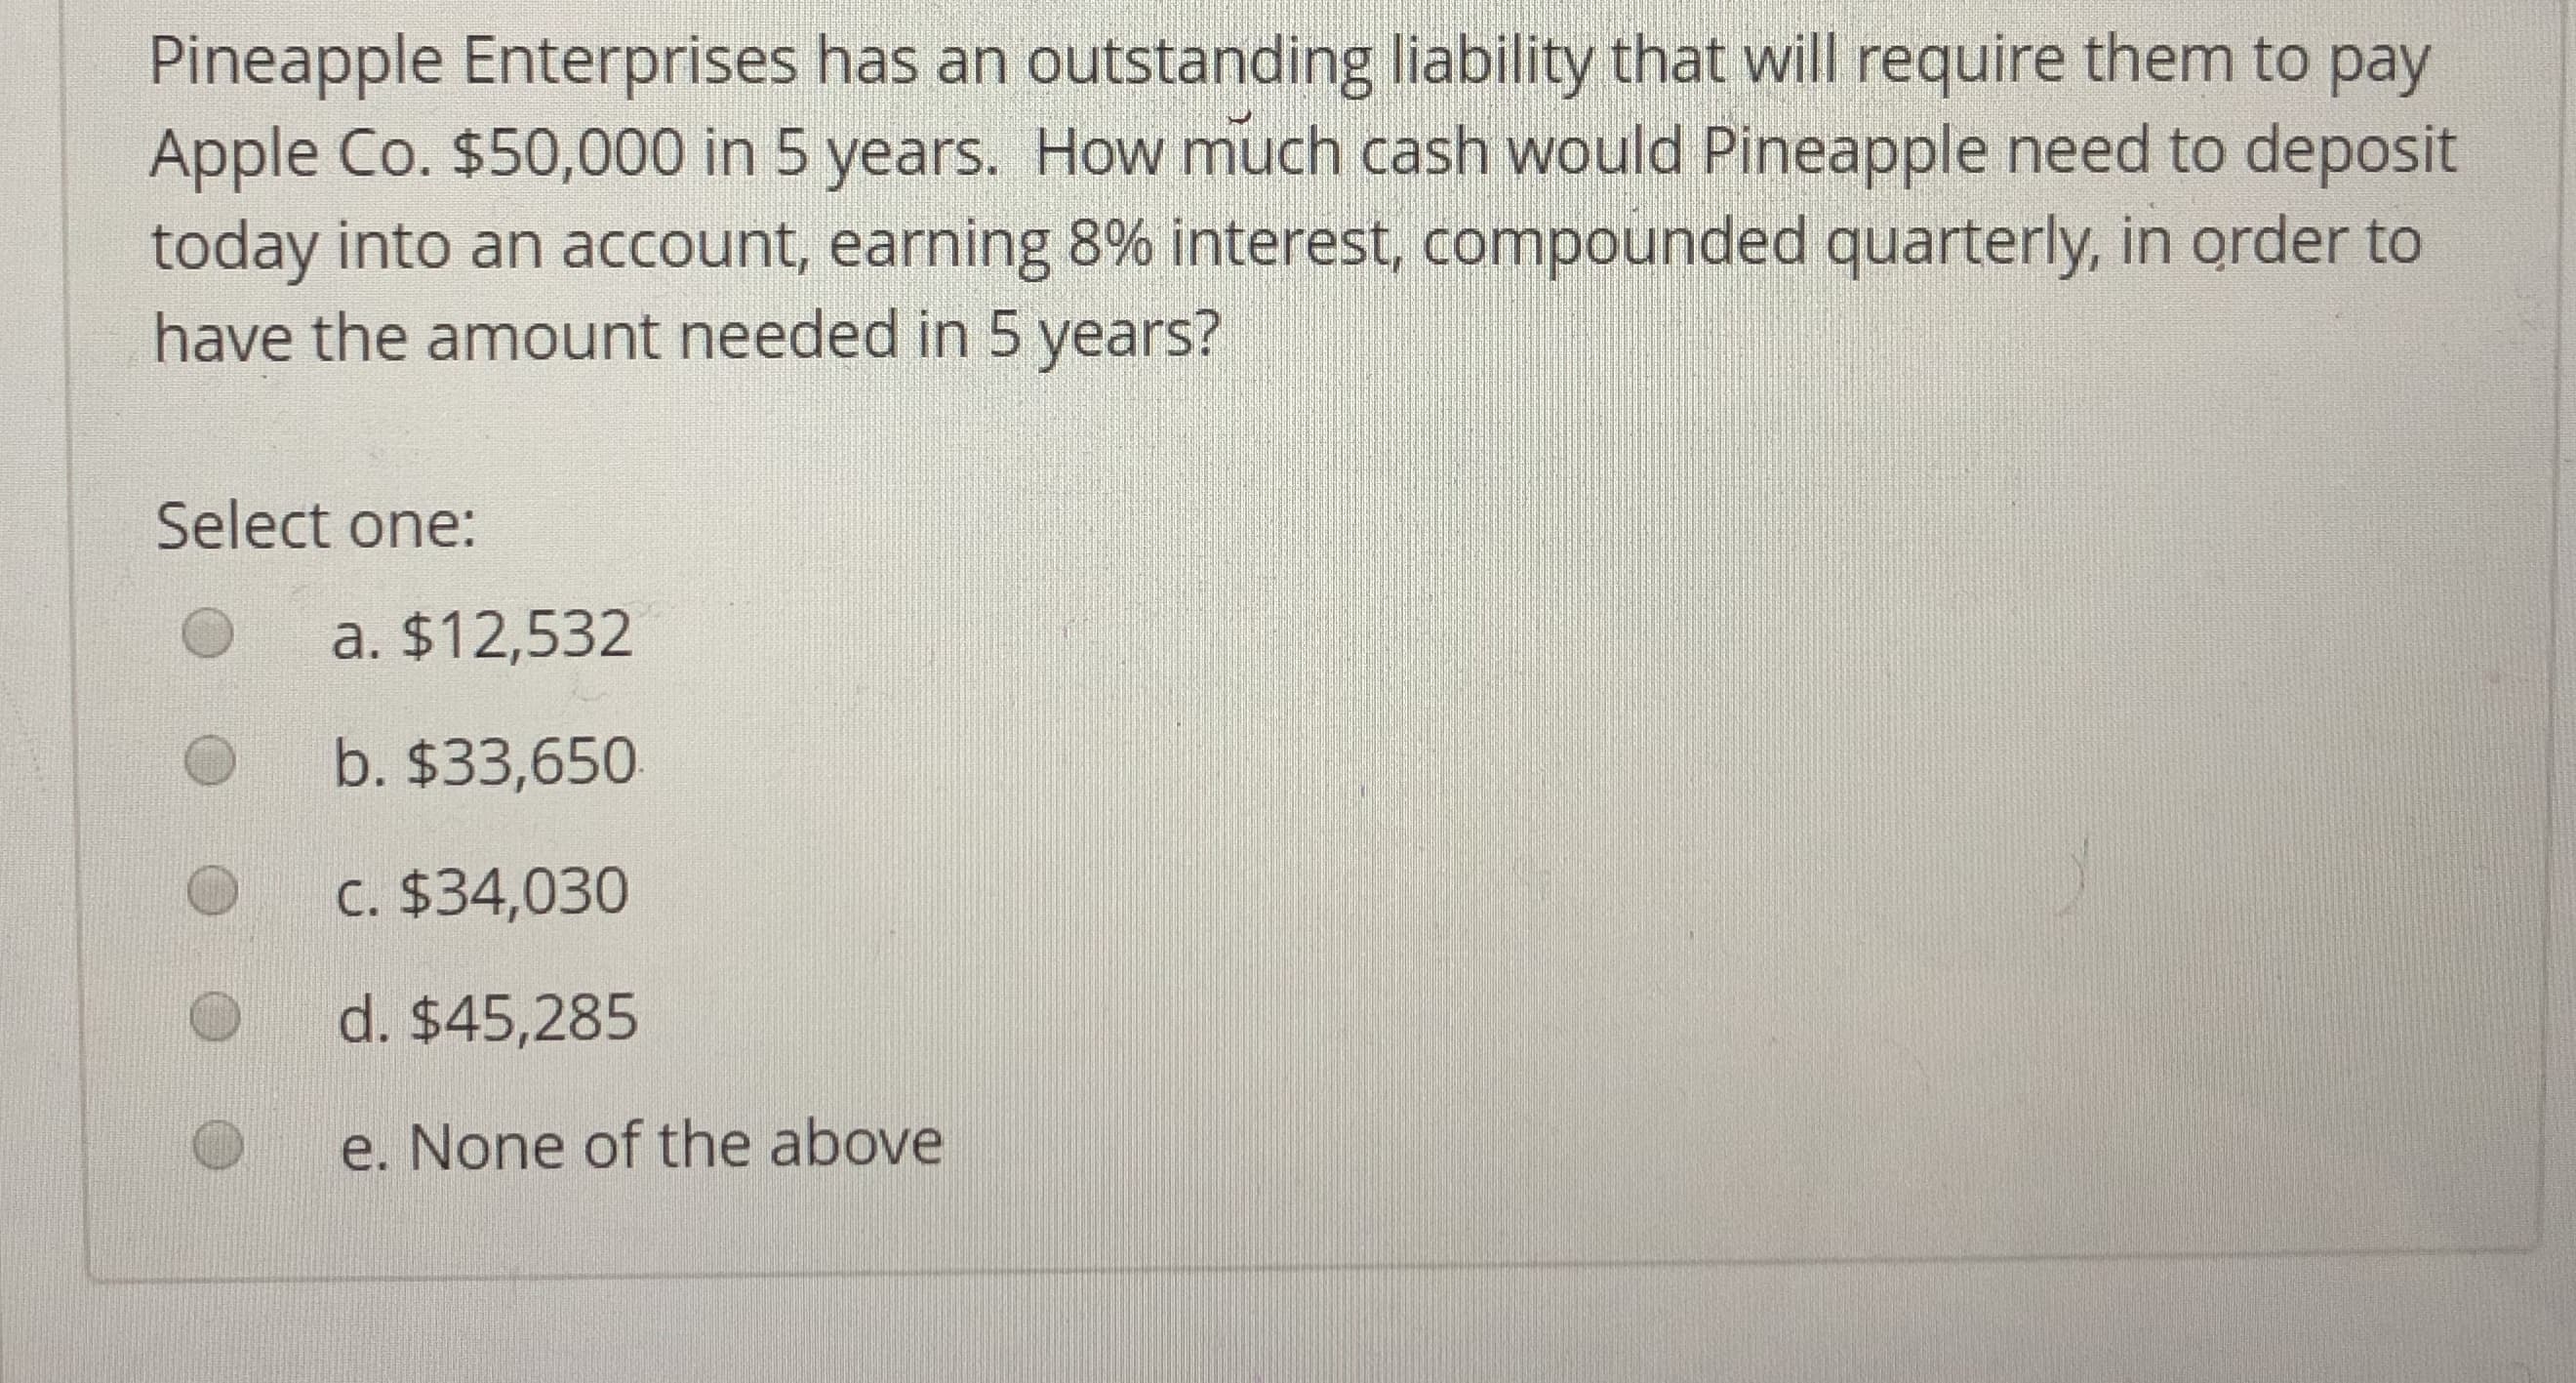 Pineapple Enterprises has an outstanding liability that will require them to pay
Apple Co. $50,000 in 5 years. How much cash would Pineapple need to deposit
today into an account, earning 8% interest, compounded quarterly, in order to
have the amount needed in 5 years?
Select one:
O a. $12,532
O b. $33,650
O C. $34,030
d. $45,285
e. None of the above
